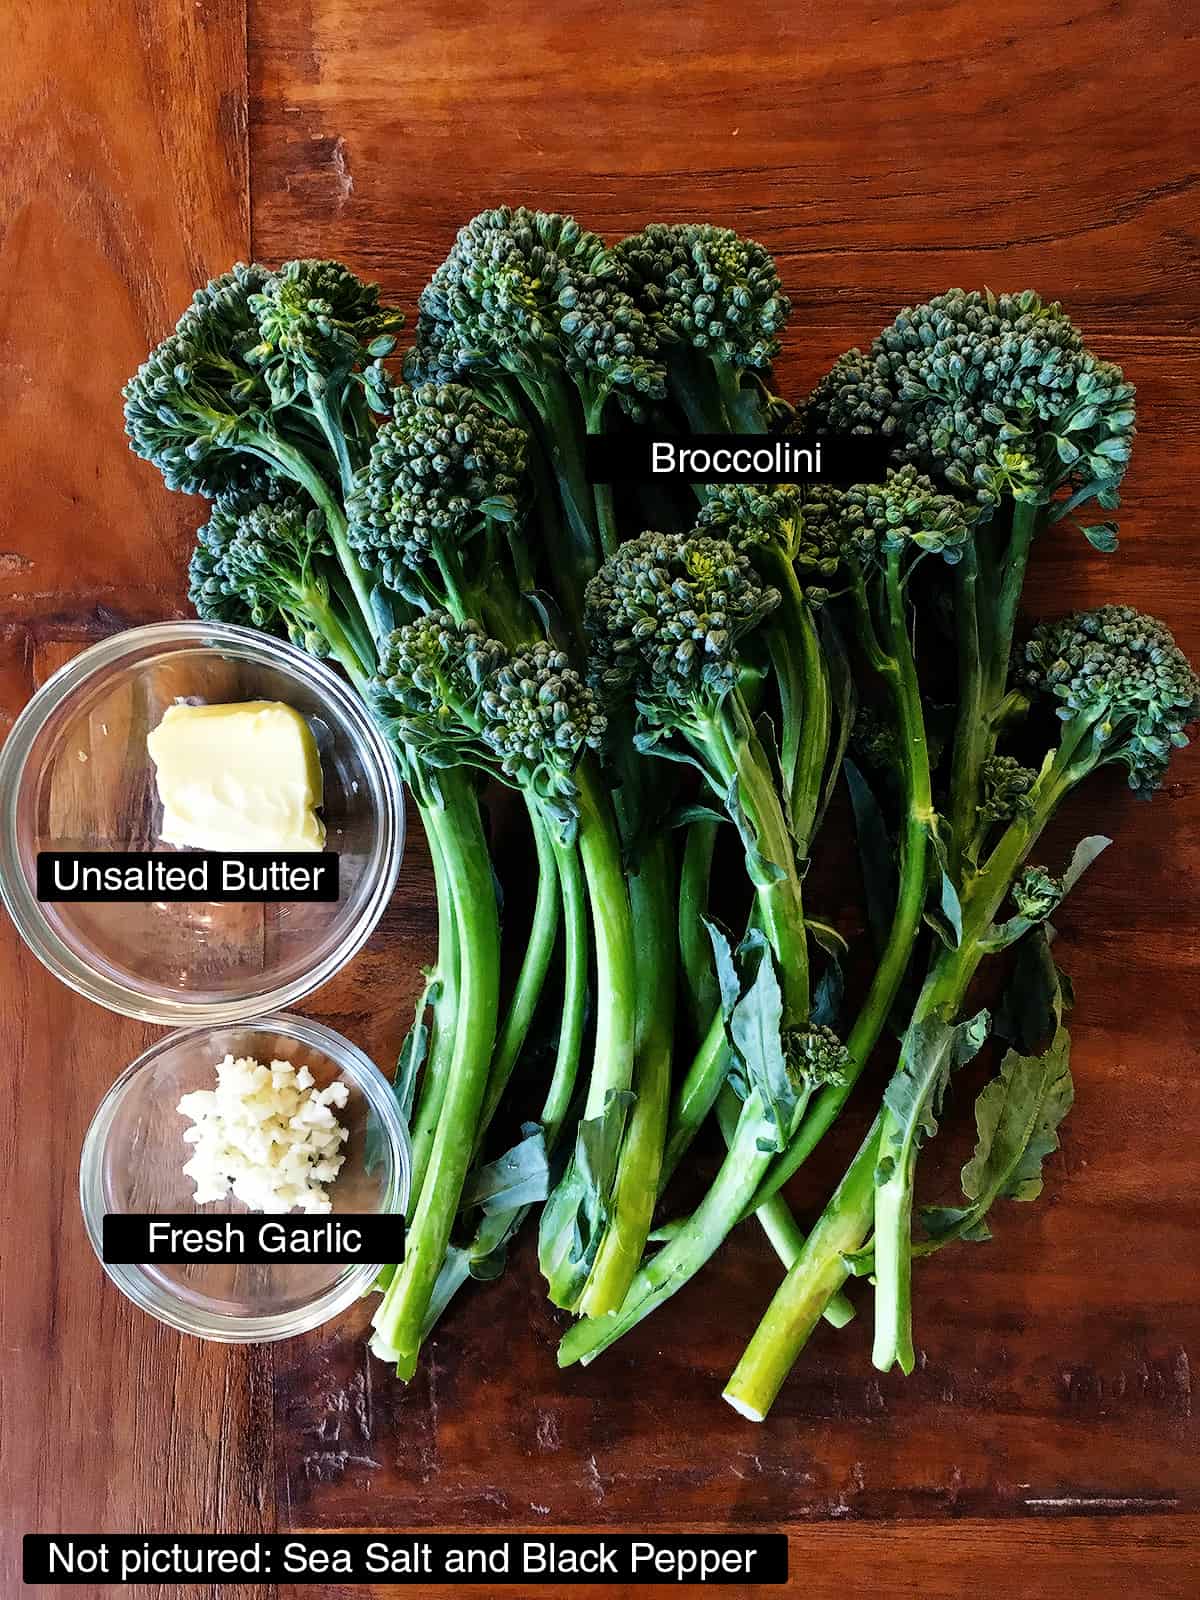 Fresh broccolini stalks next to small glass bowls of butter and minced garlic on a brown wood table